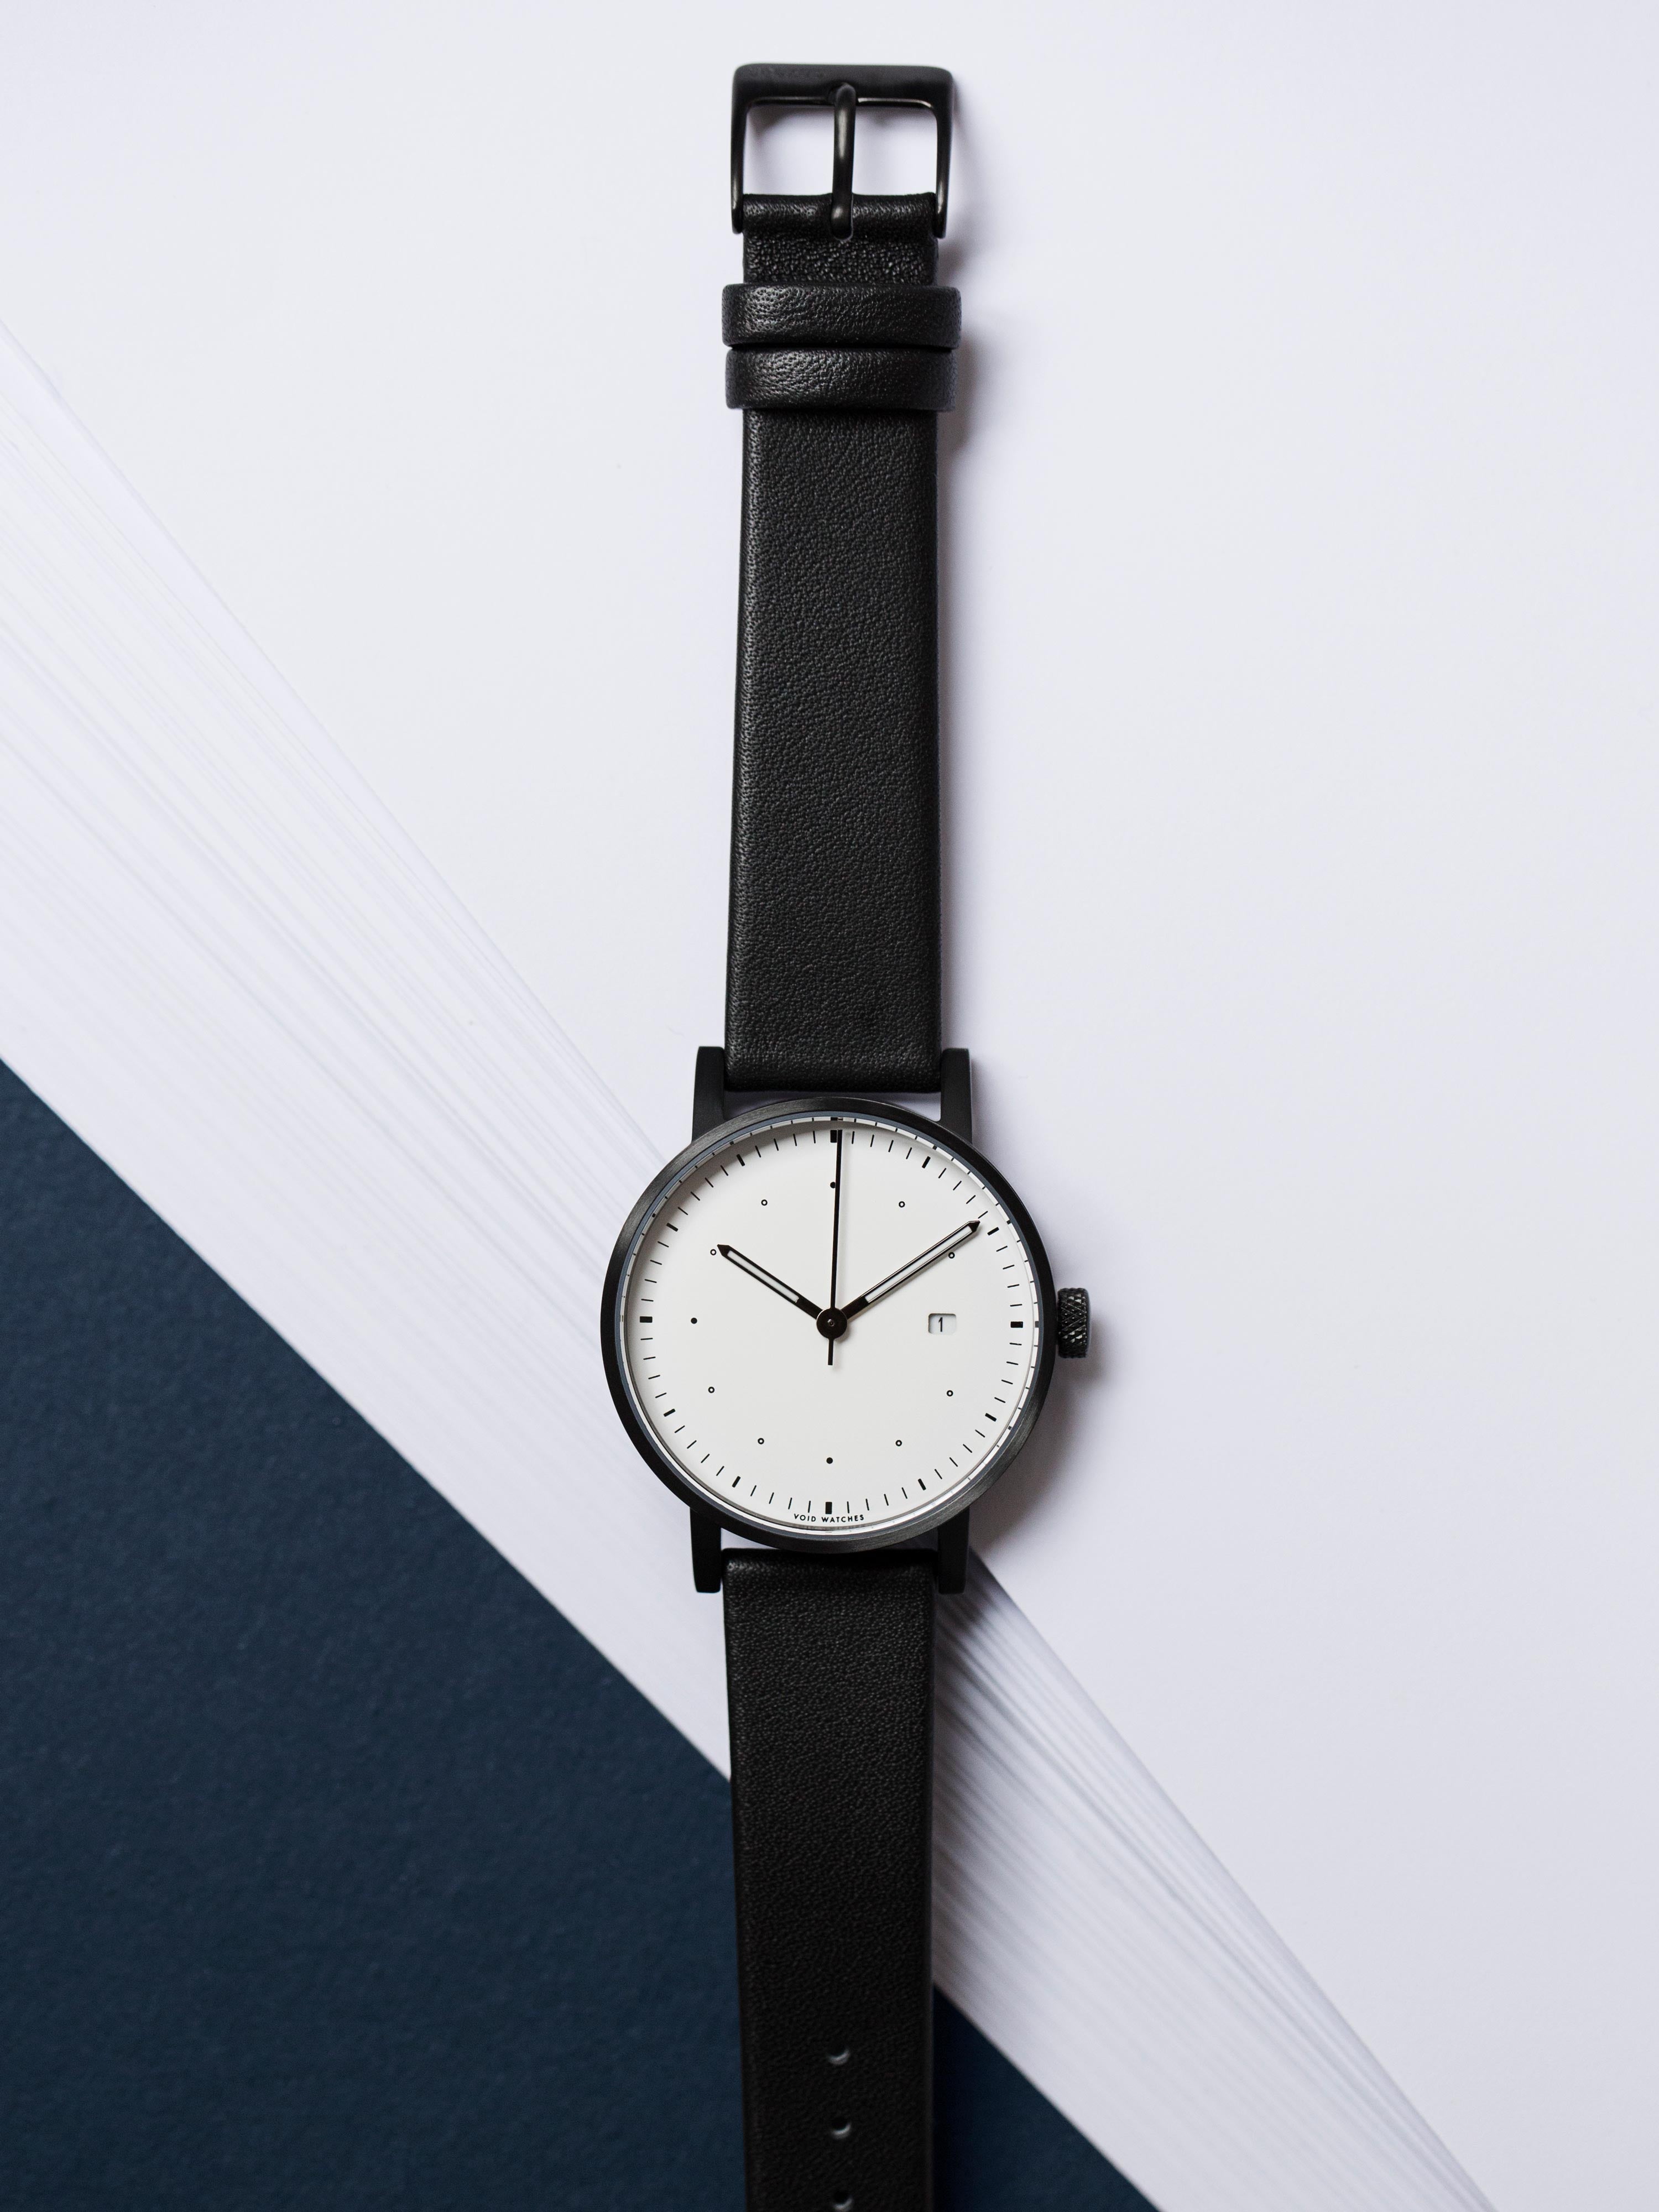 The monochromatic V03D Dezeen watch by David Ericsson and Patrick Kim Gustafson for VOID Watches